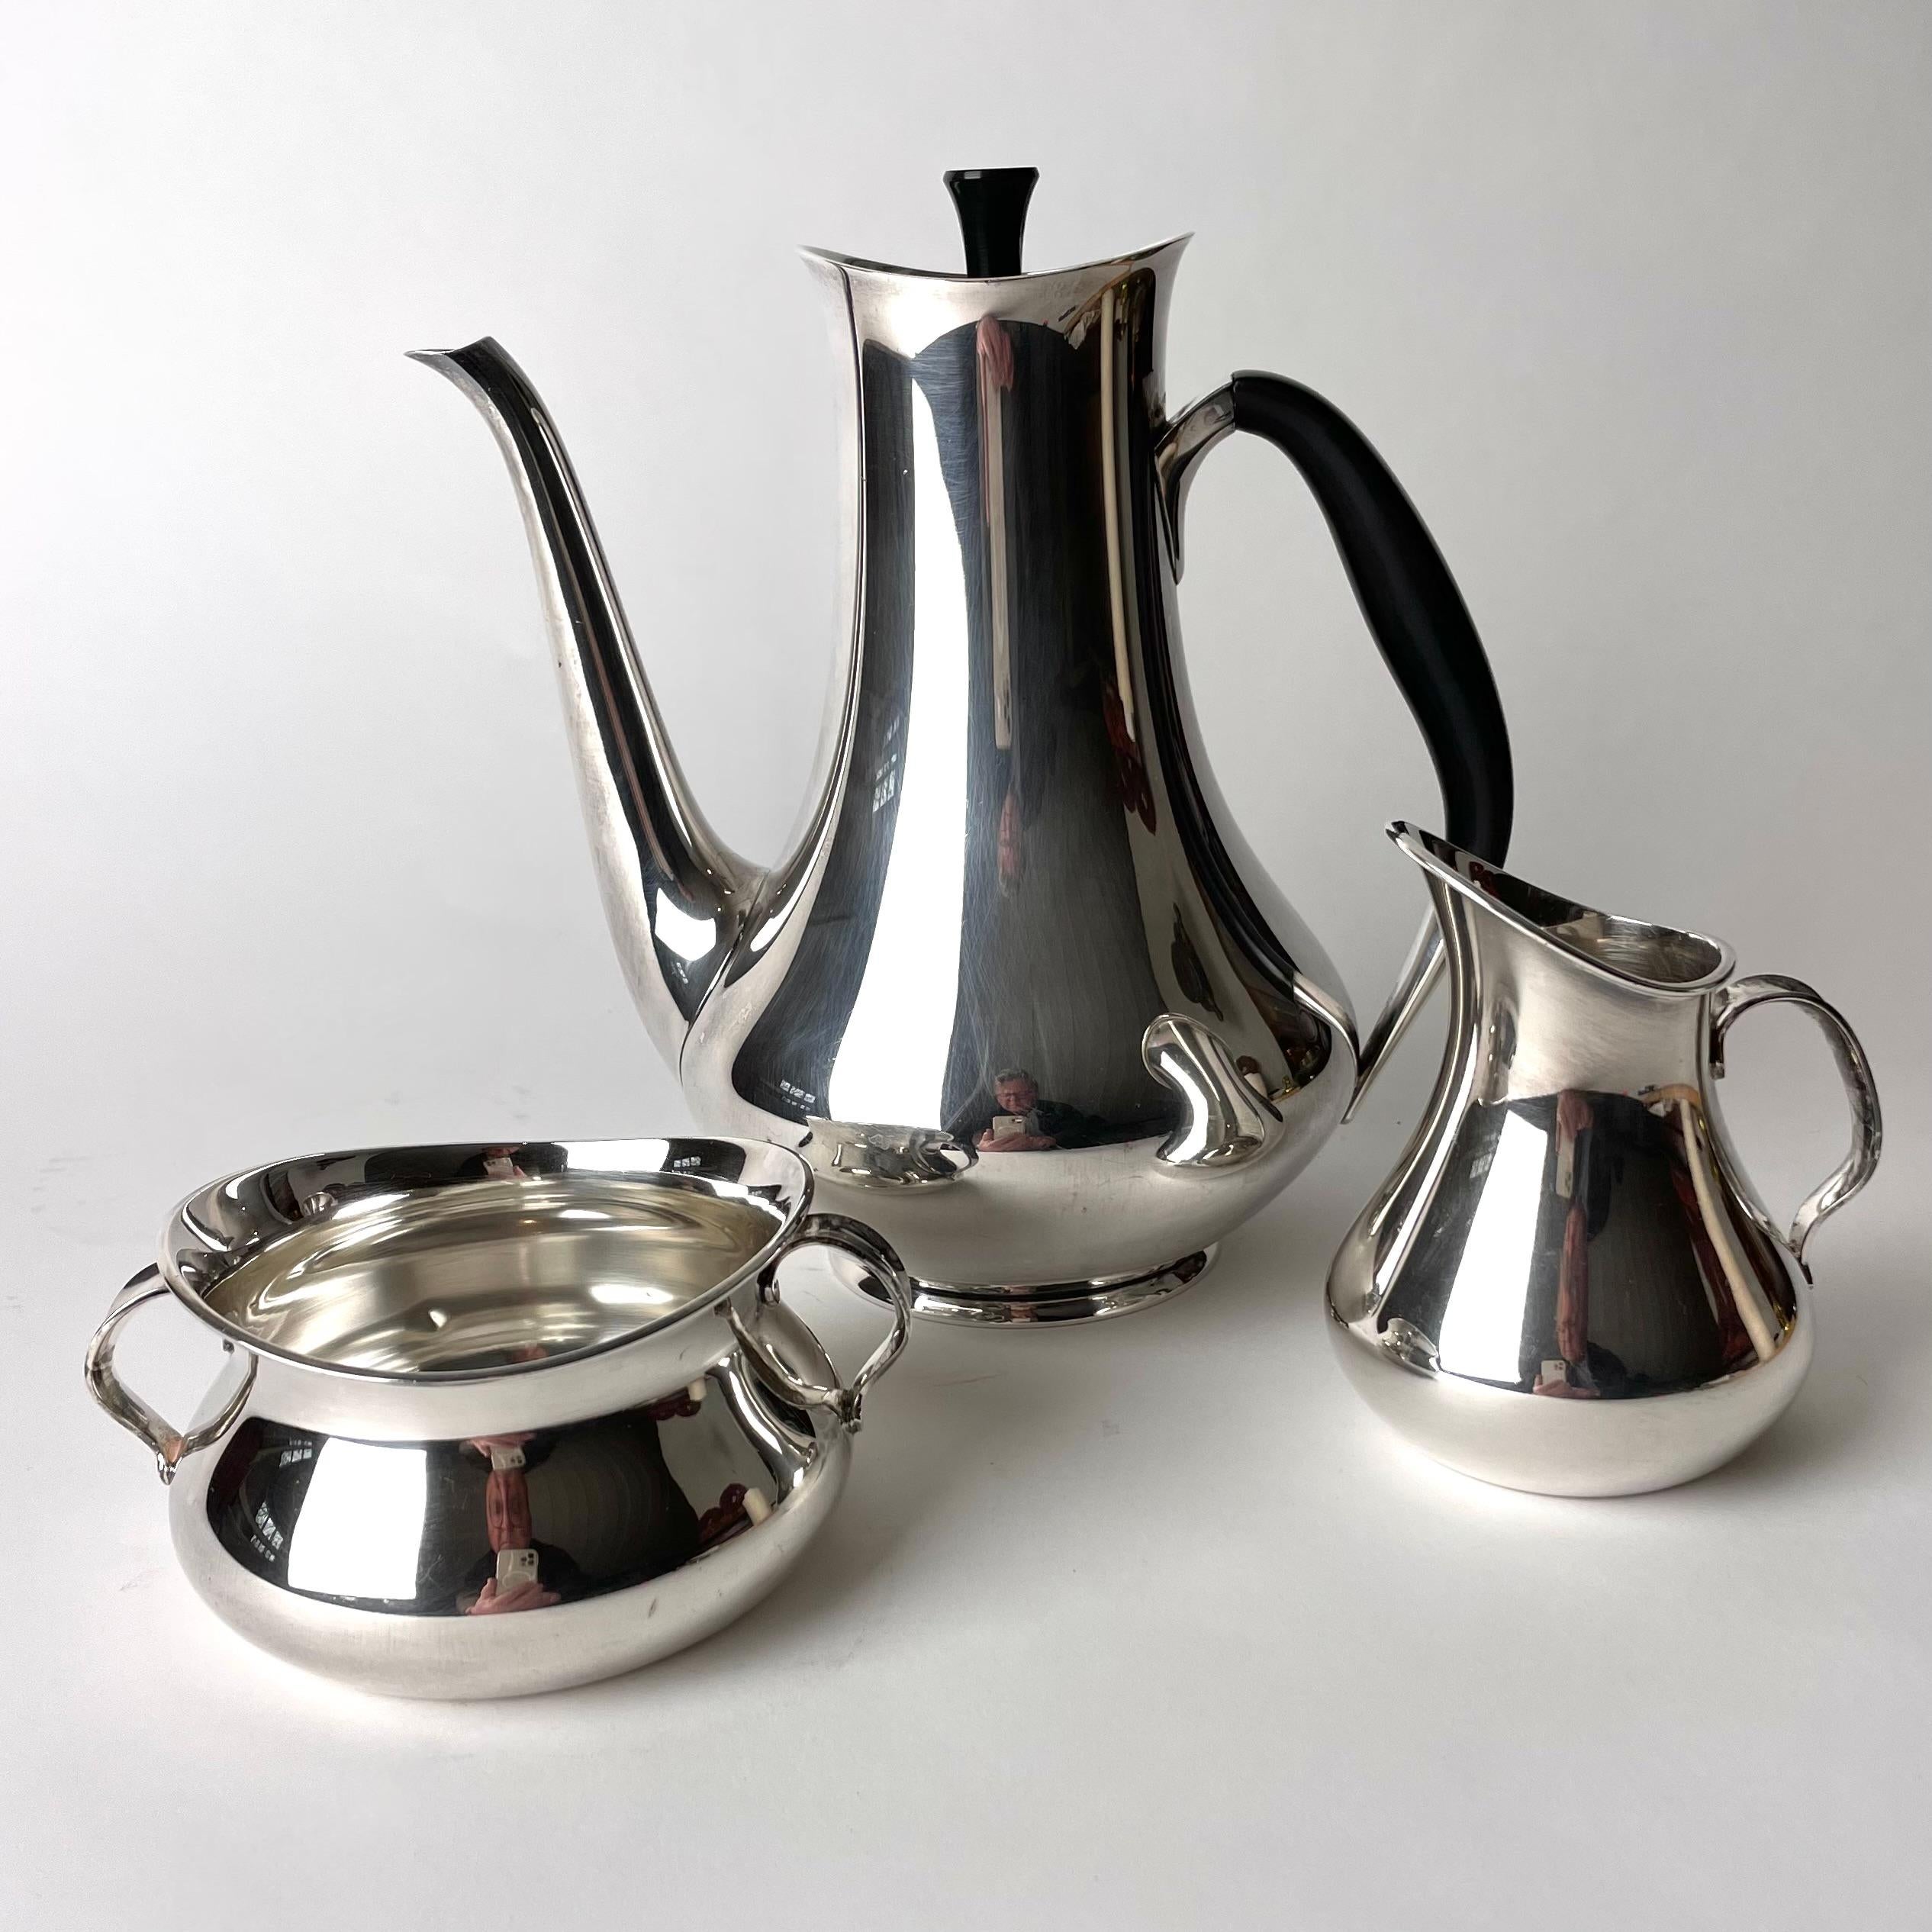 Very elegant Danish Coffee set of three parts in Silver by Hans Bunde (1919-1996) for Cohr. Designed in 1958 and with Danish and Swedish control stamps for silver. 

Dimensions:
20*19*13 cm
6*12*10 cm
10*9*7 cm

Minor marks and dents exist (see